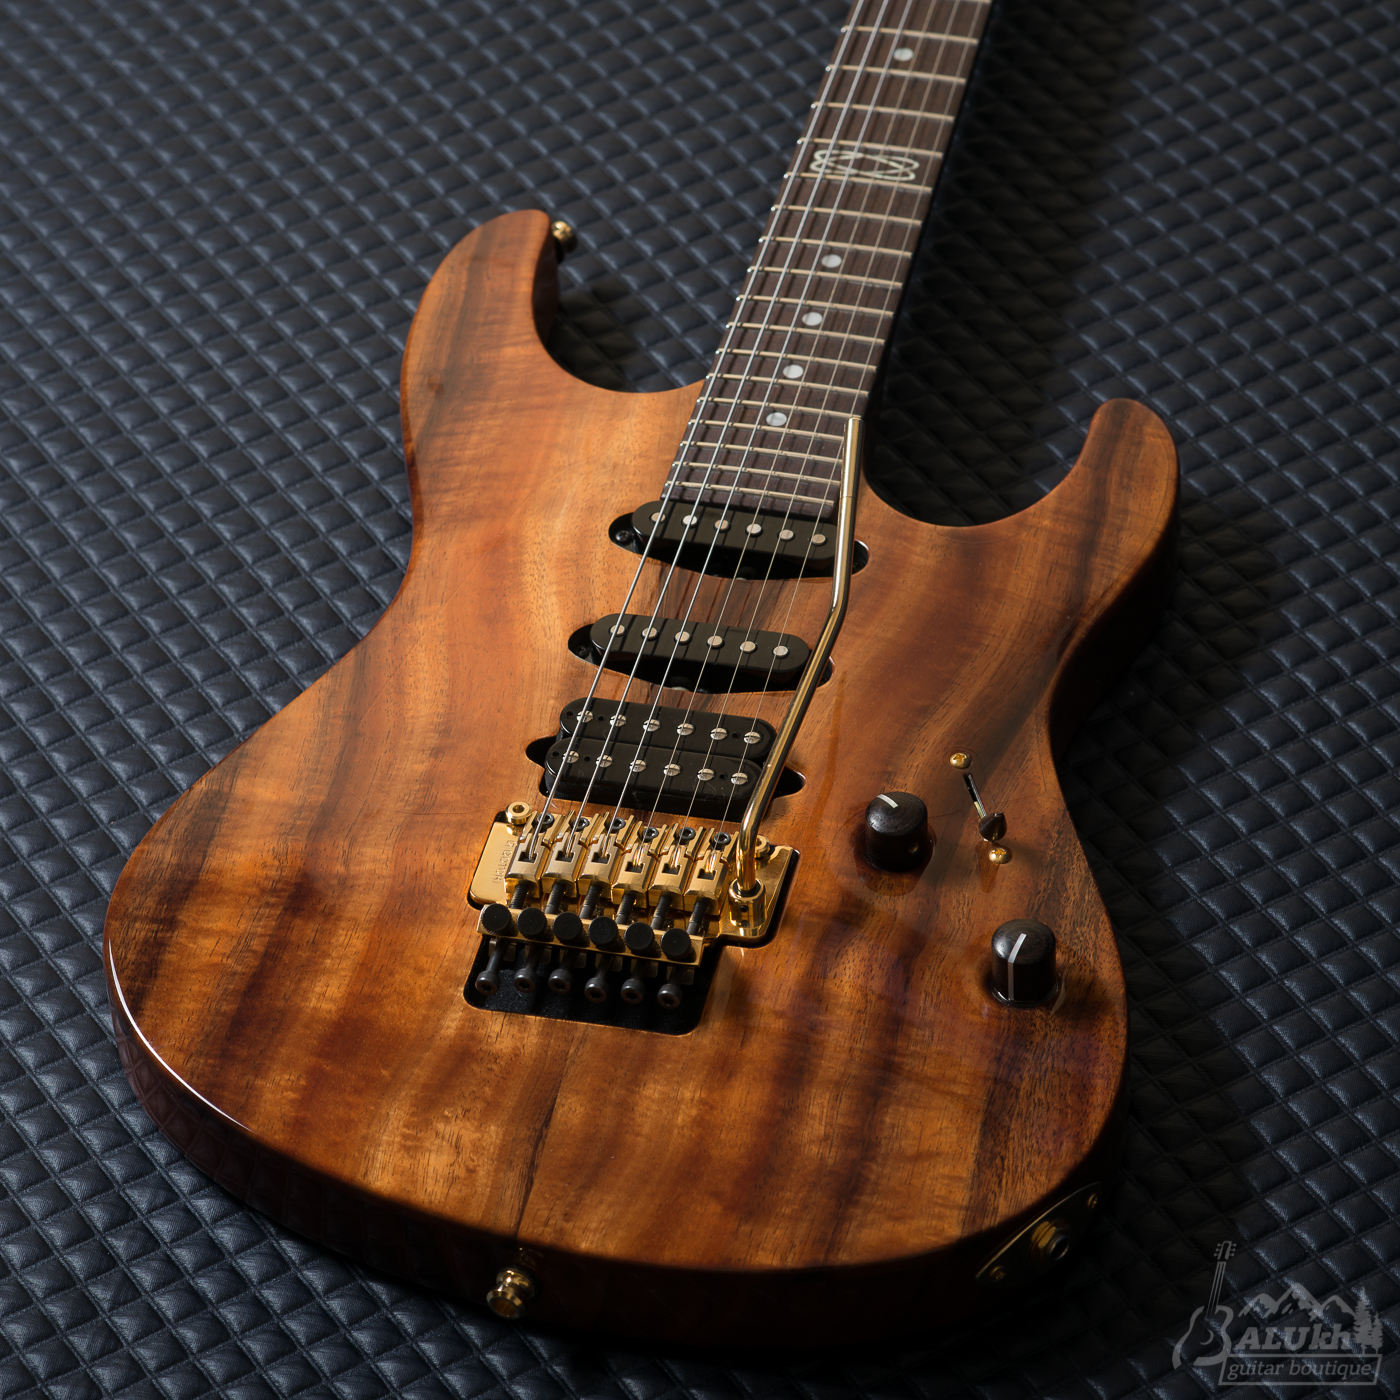 SUHR – The 2013 collection #19